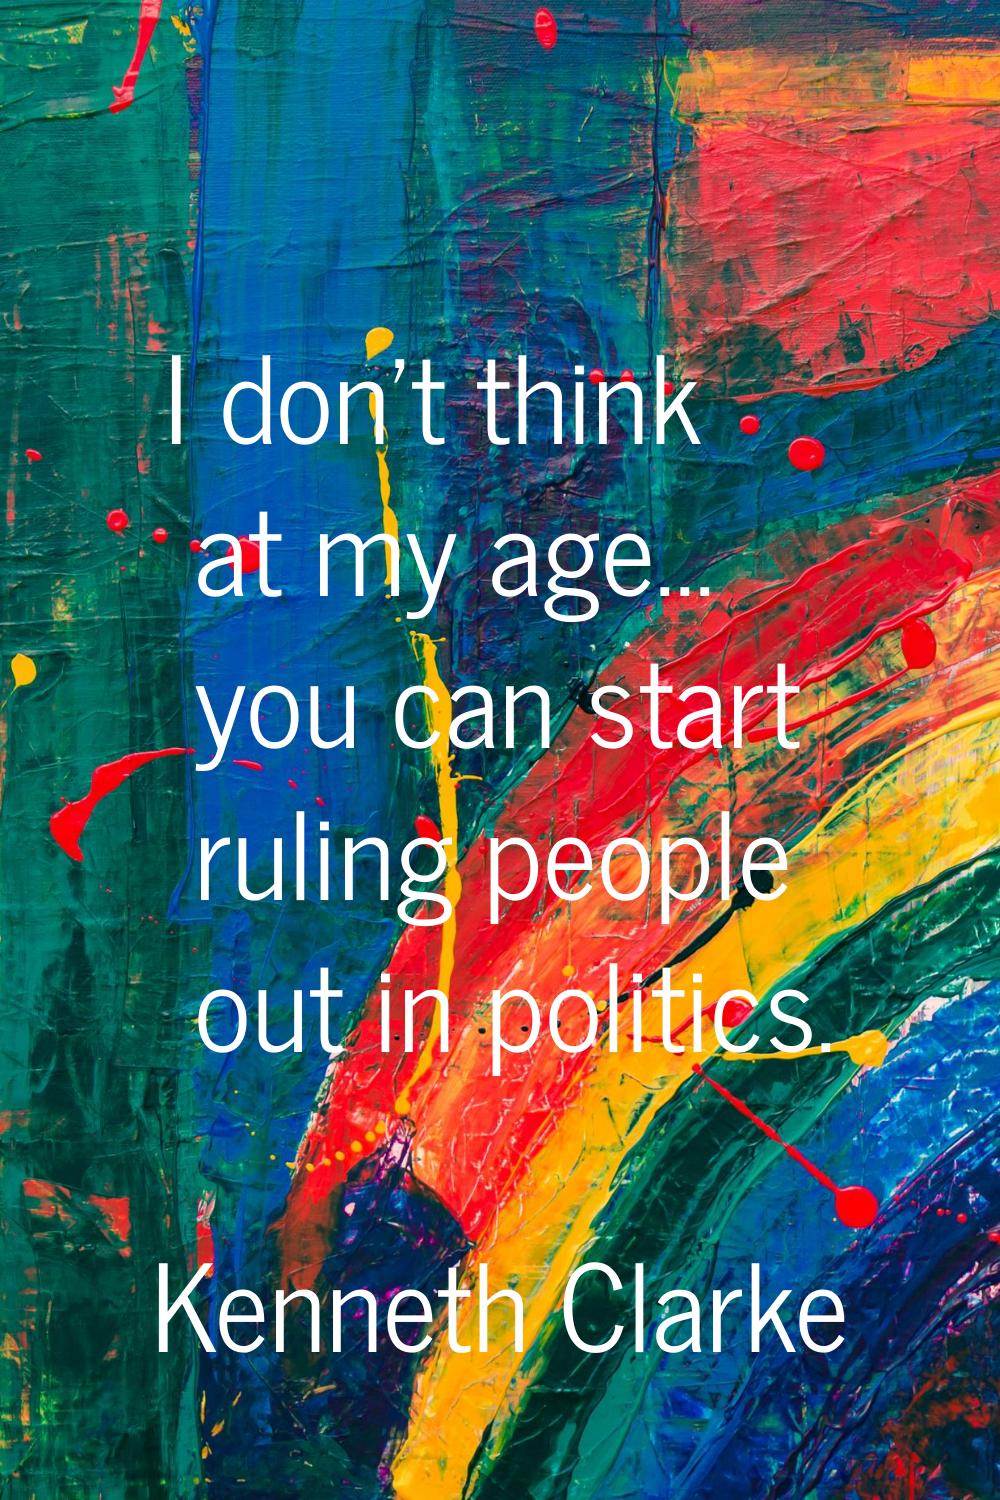 I don't think at my age... you can start ruling people out in politics.